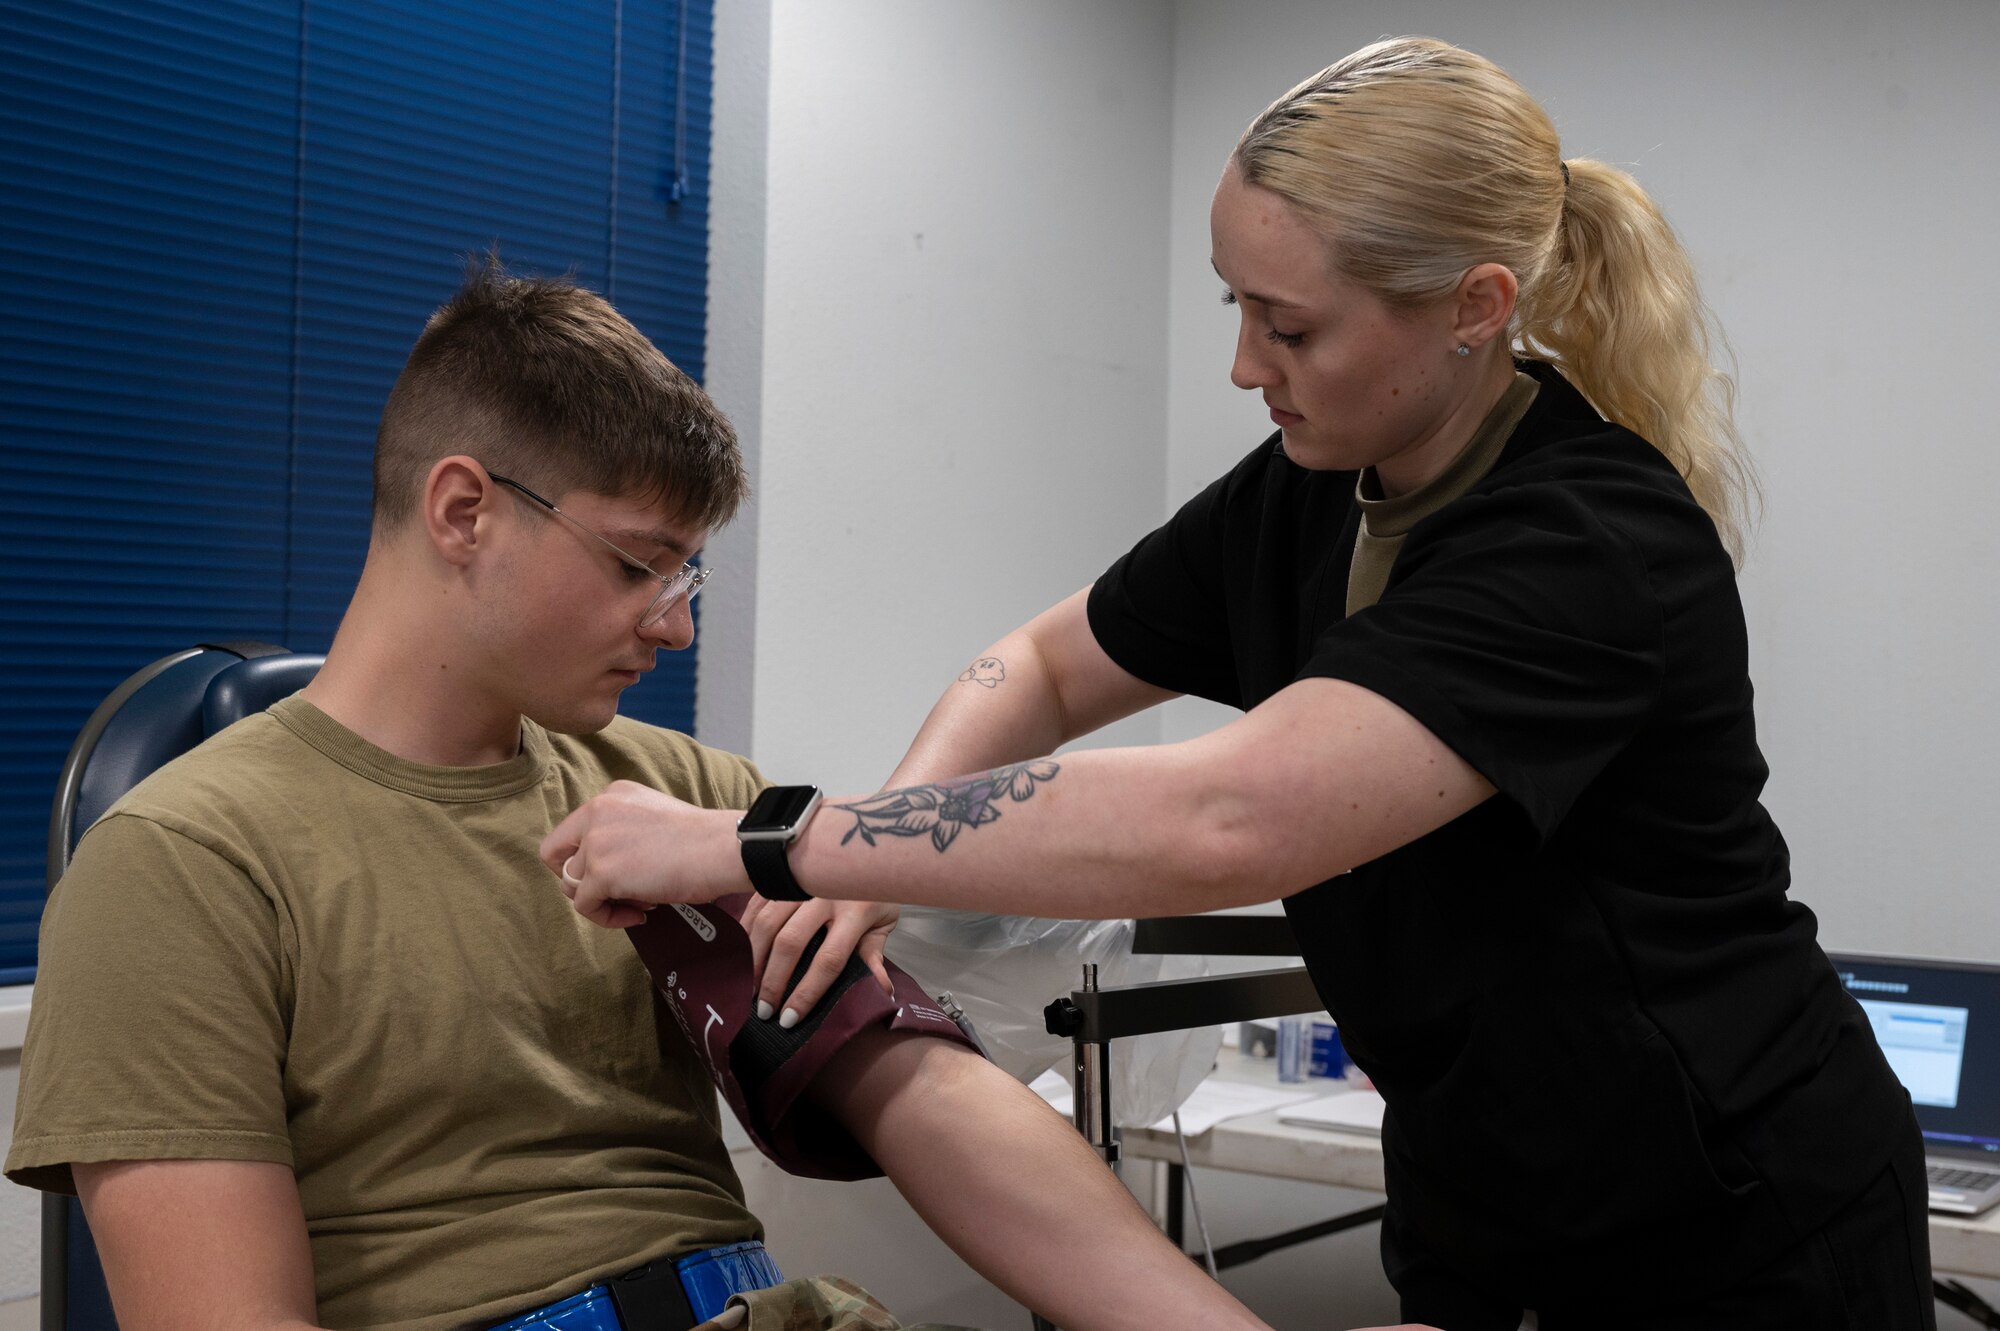 U.S. Air Force Senior Airman Tiffany O’Neal, 7th Operational Medical Readiness Squadron dental flight dental assistant, checks Senior Airman Maxwell Kosko’s, 317th Aircraft Maintenance Squadron environmental electrical technician, blood pressure during a dental exam in the Mobile Dental Clinic at Dyess Air Force Base, Texas, Nov. 30, 2023. The 7th OMRS is promoting readiness through the new Mobile Dental Clinic by providing dental care to Airmen working swing and mid shift hours, ensuring a medically ready and deployable force. (U.S. Air Force photo by Airman 1st Class Alondra Cristobal Hernandez)